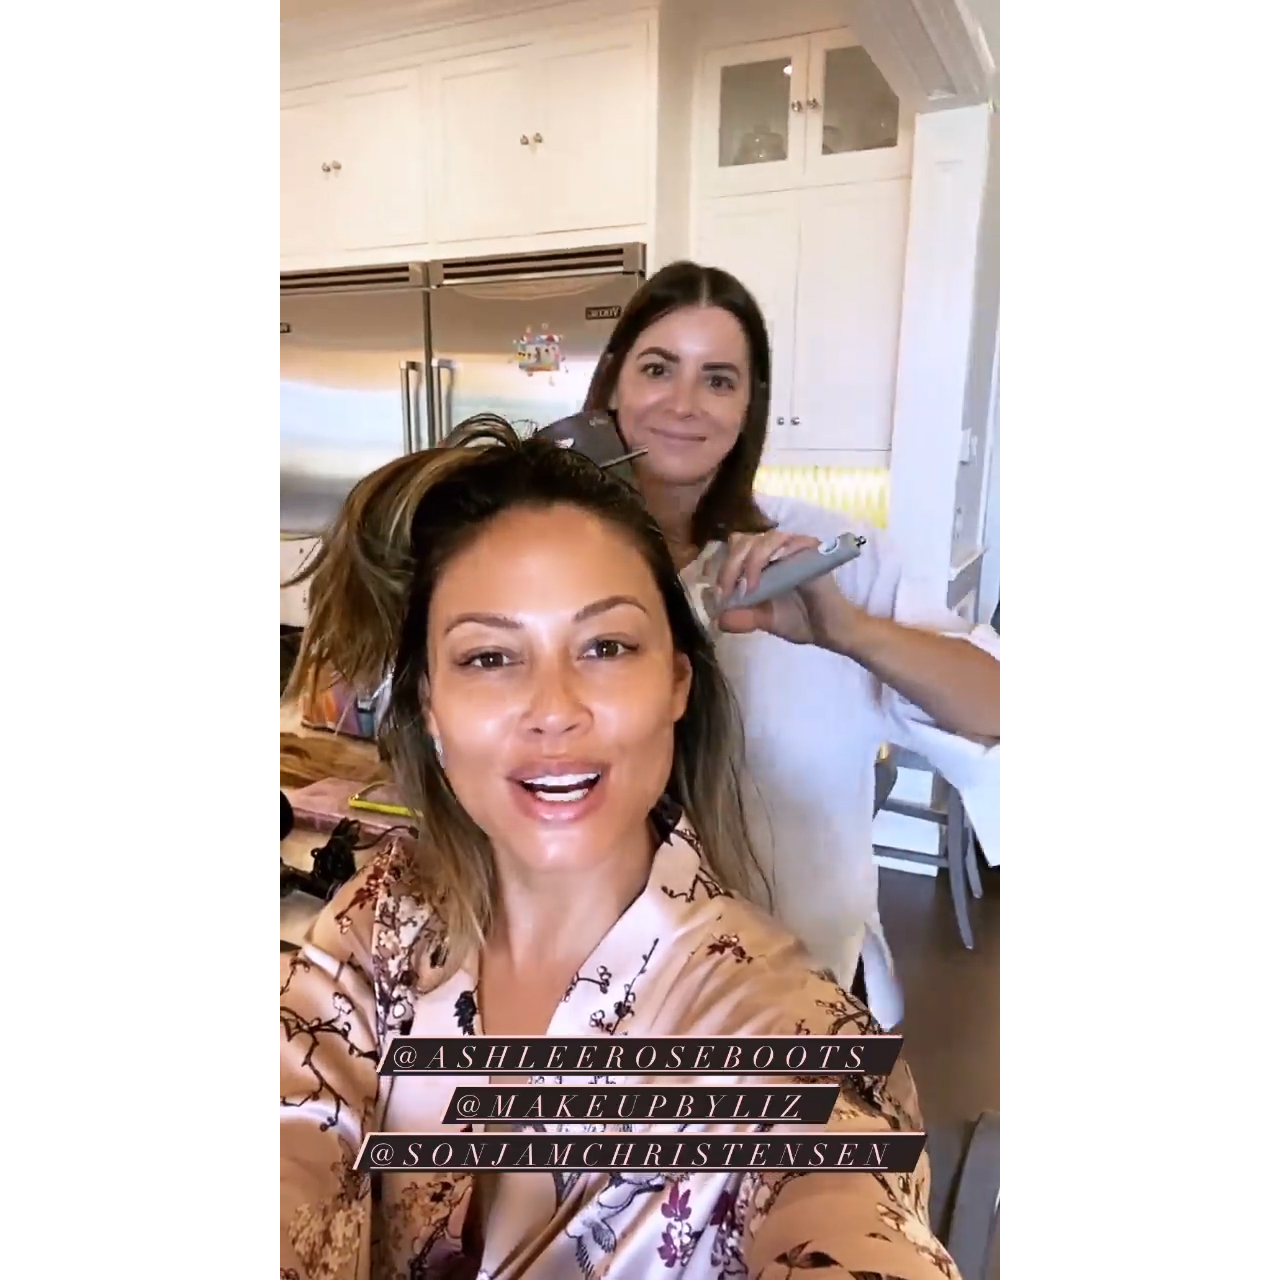 Glam Time! See the Stars Getting Ready Ahead of the 2021 Emmys